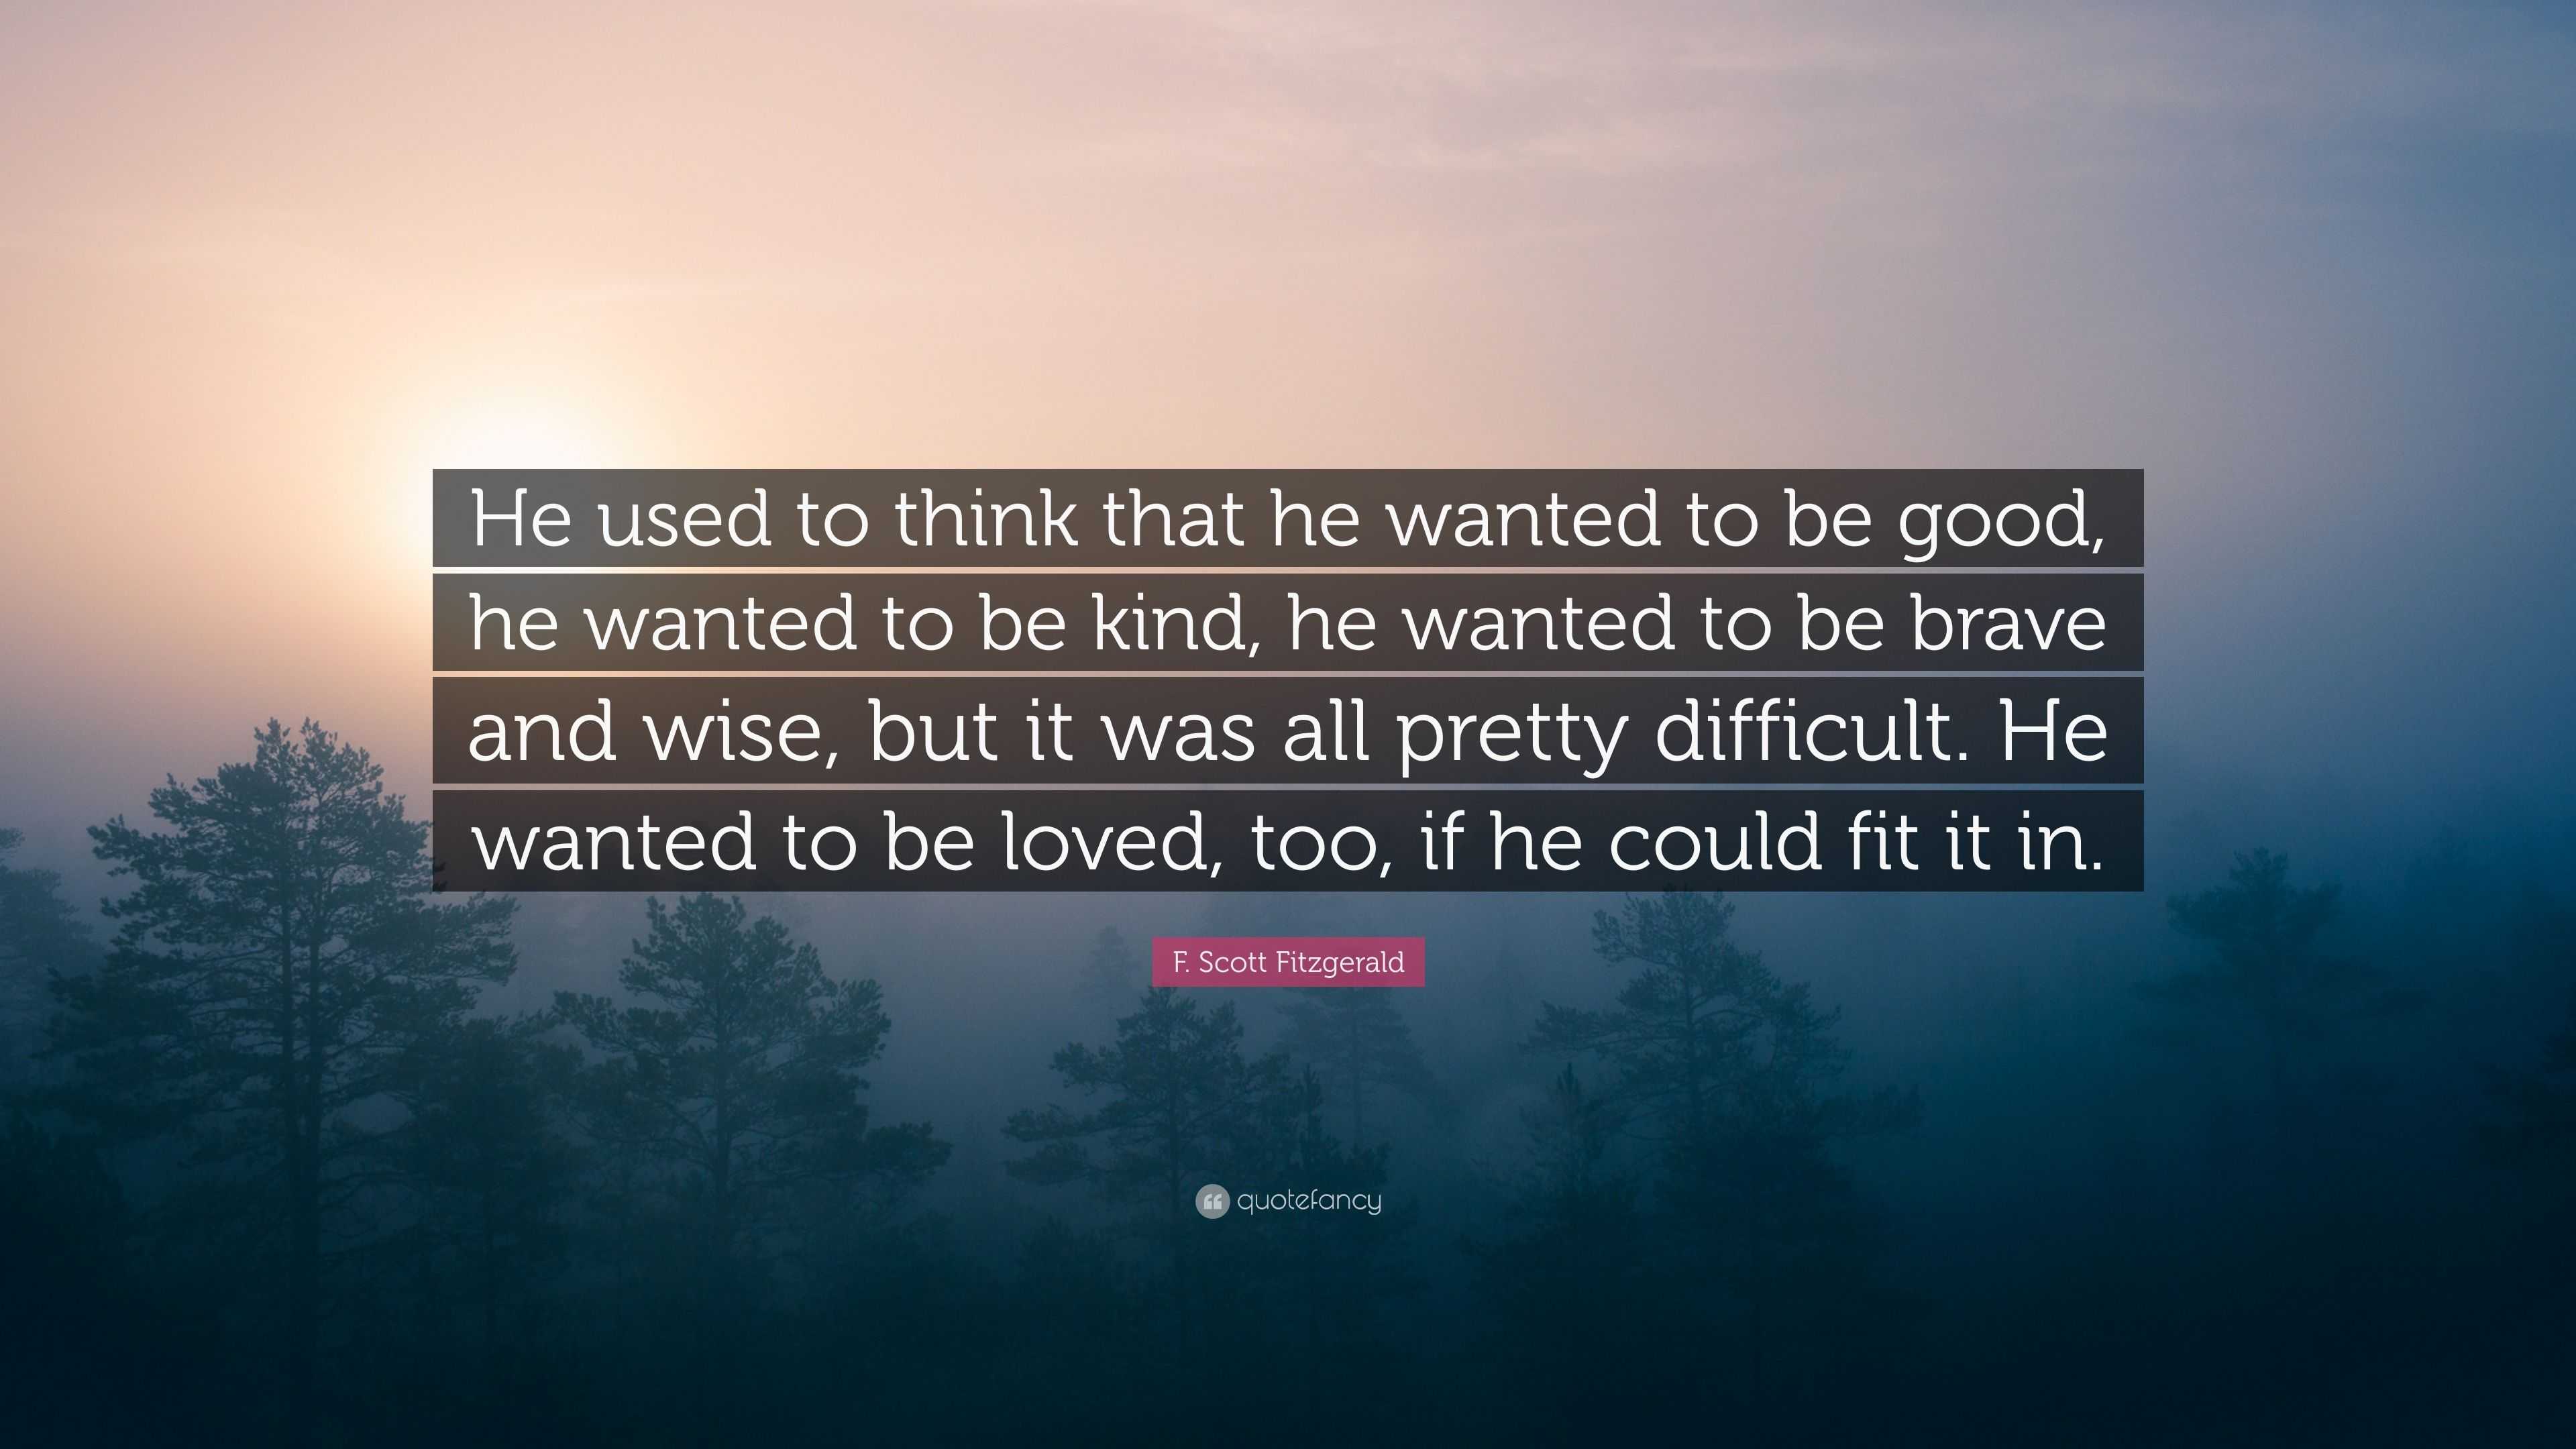 F. Scott Fitzgerald Quote: “He used to think that he wanted to good, he wanted to be kind, he wanted to be brave and wise, but it was all pretty ...”